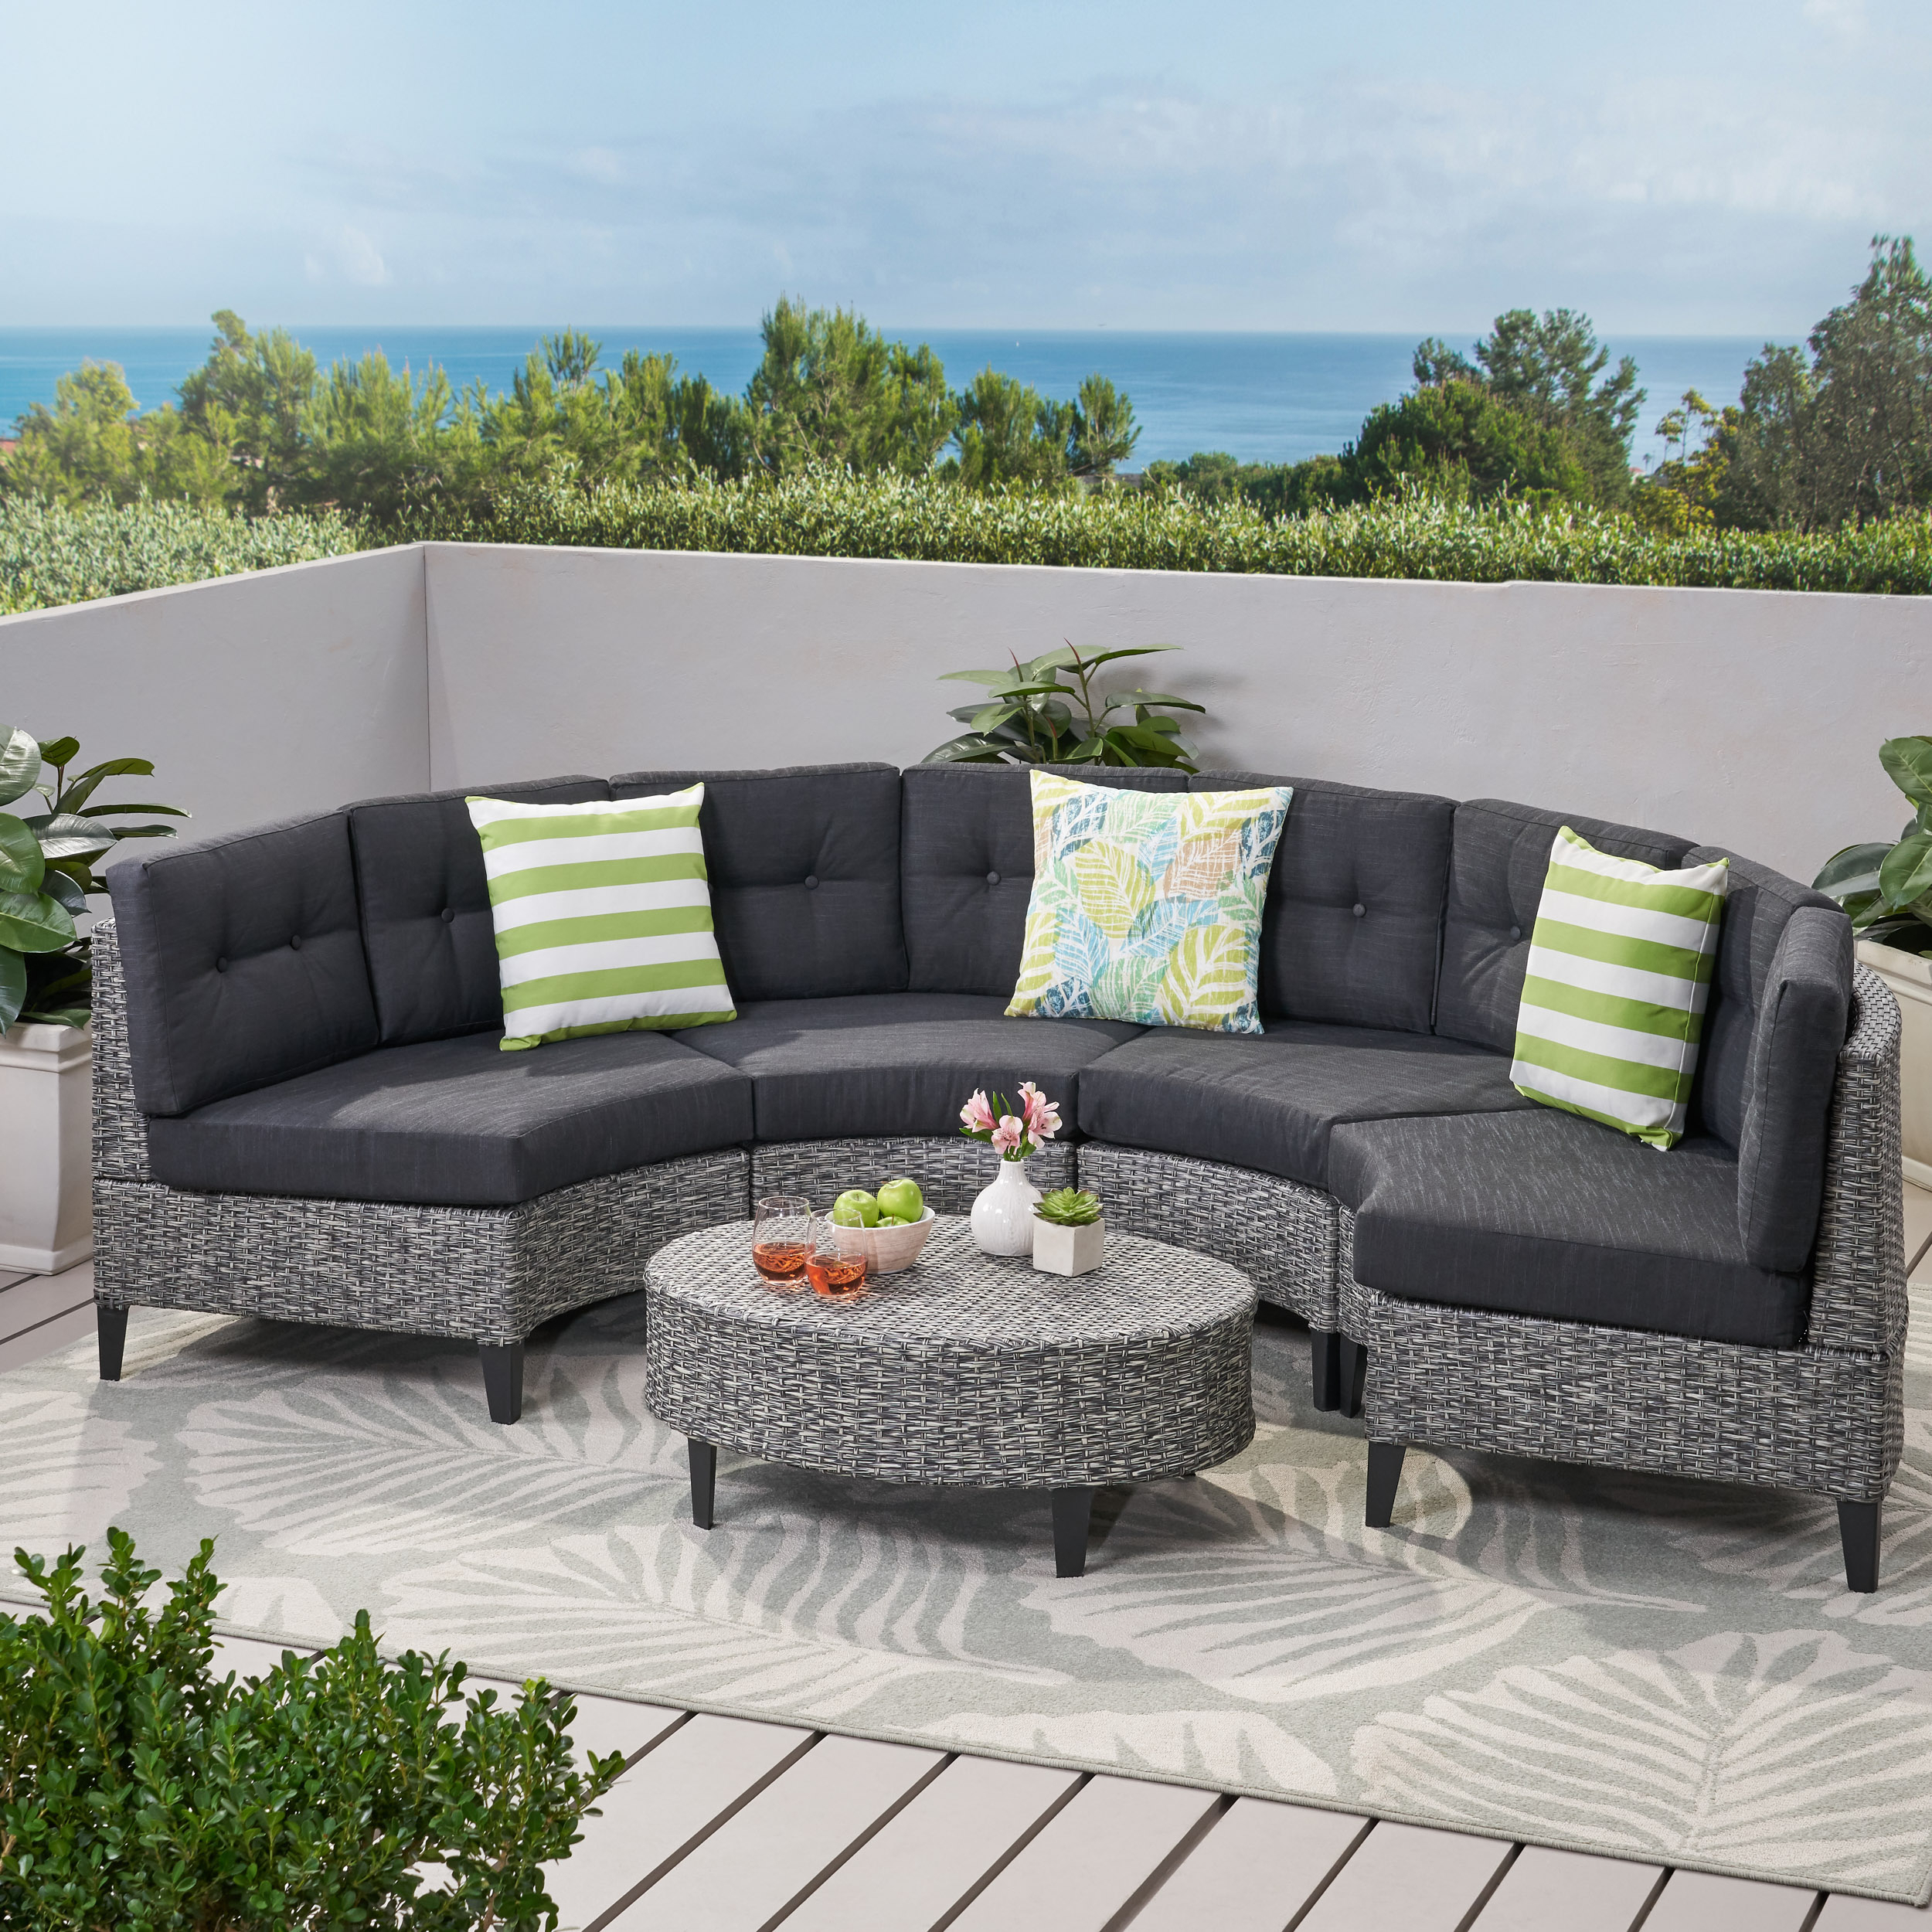 Currituck Outdoor 5 Piece Mixed Black Wicker Sofa Set With Dark Grey Water Resistant Fabric Cushions